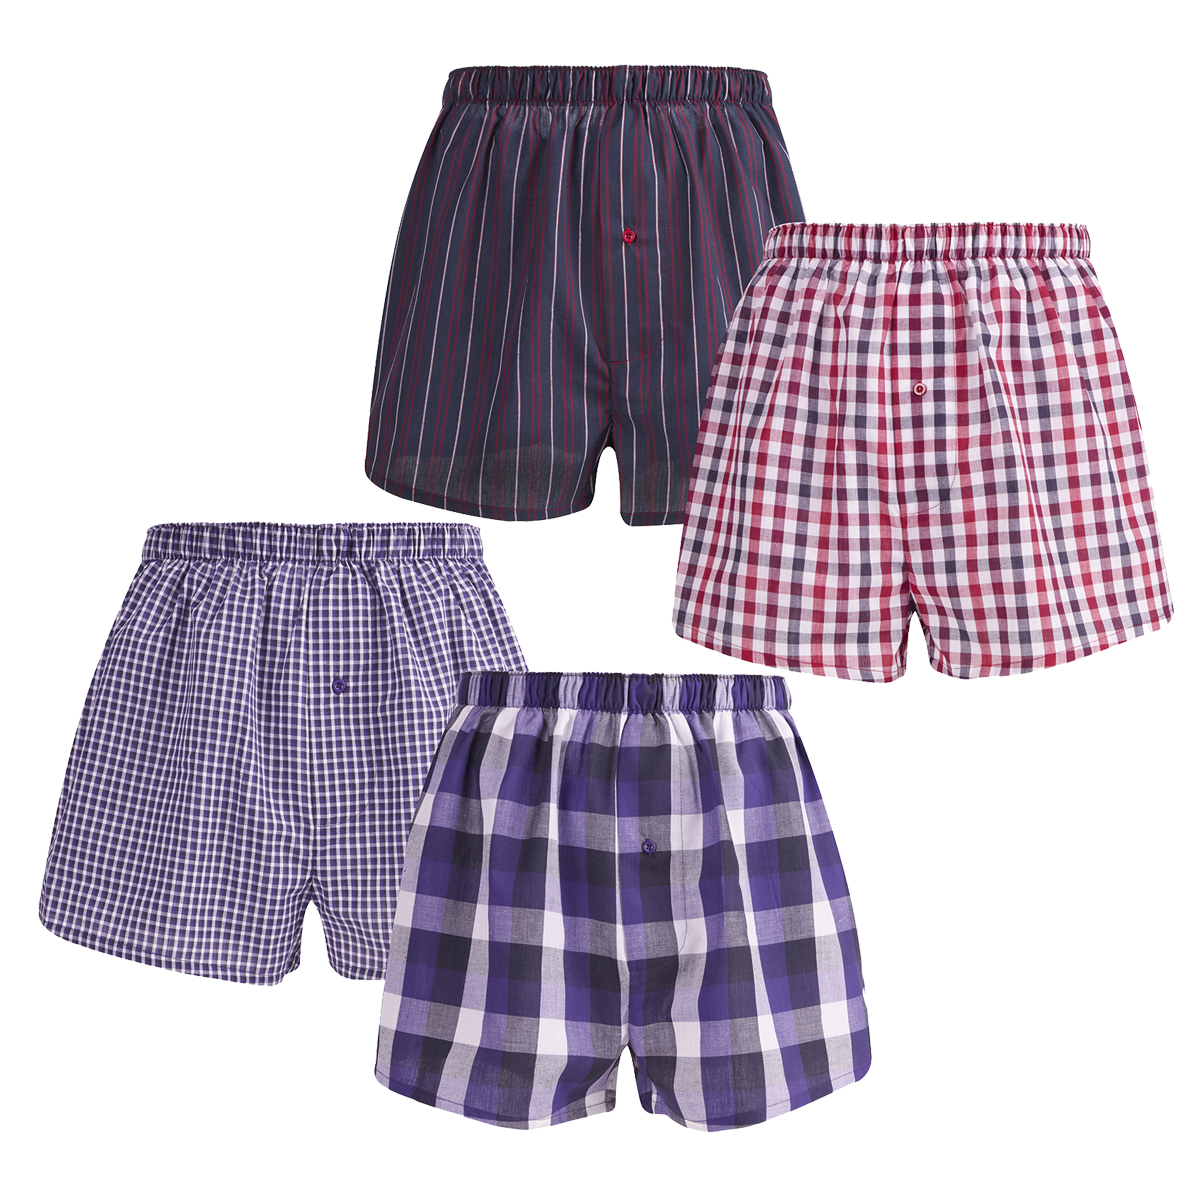 CARGO BAY Mens Check Stripe Boxer Shorts Boxers Underwear Trunks 2 Pack ...